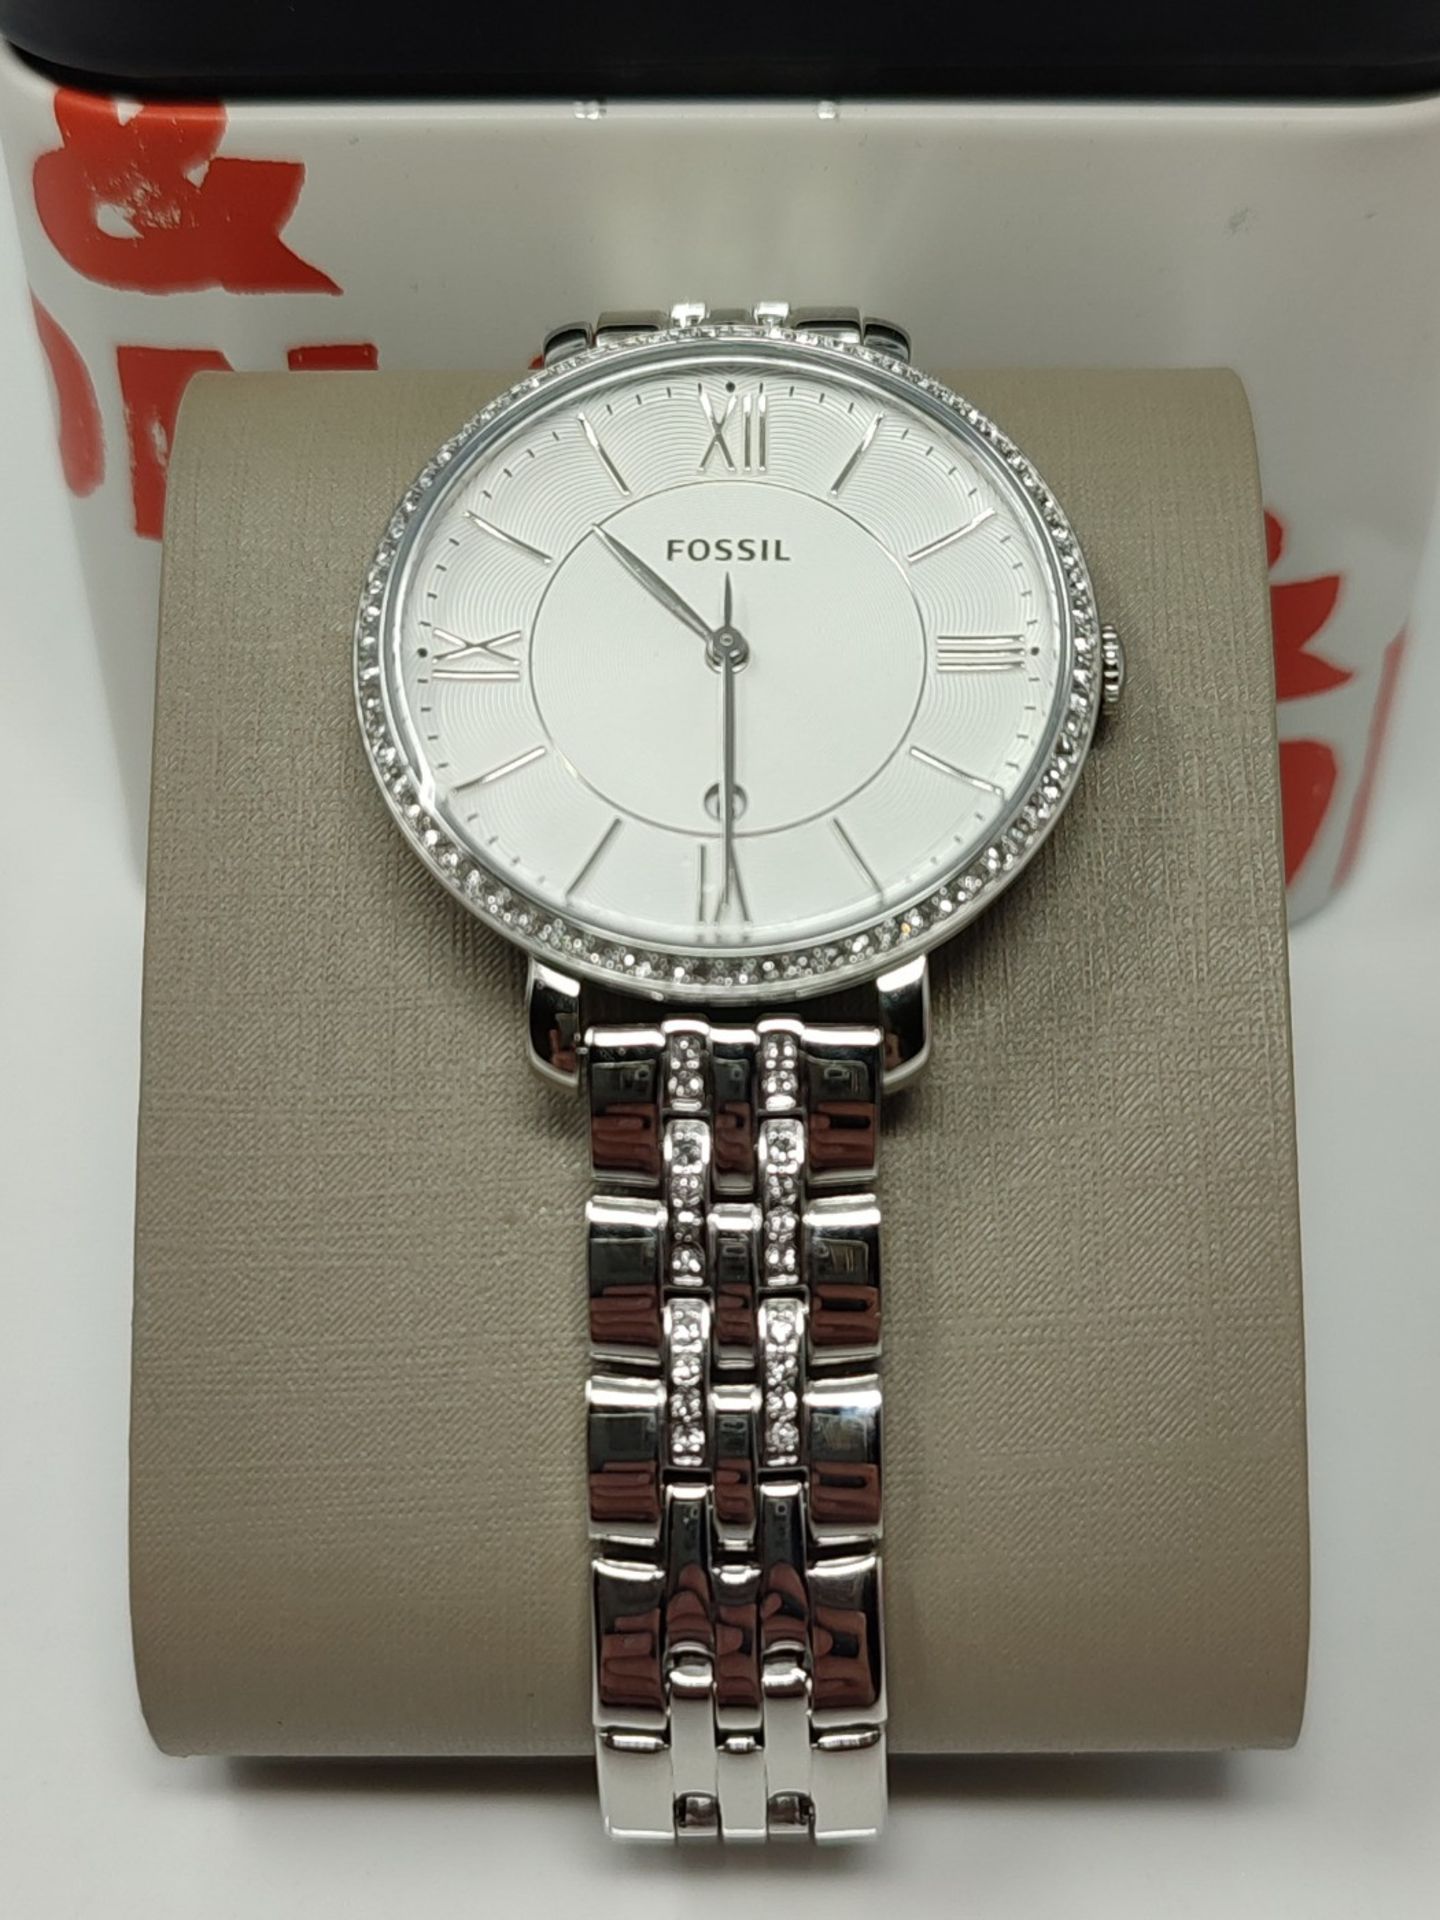 RRP £99.00 Fossil Women's Jacqueline Quartz Stainless Steel Dress Watch - Image 3 of 3